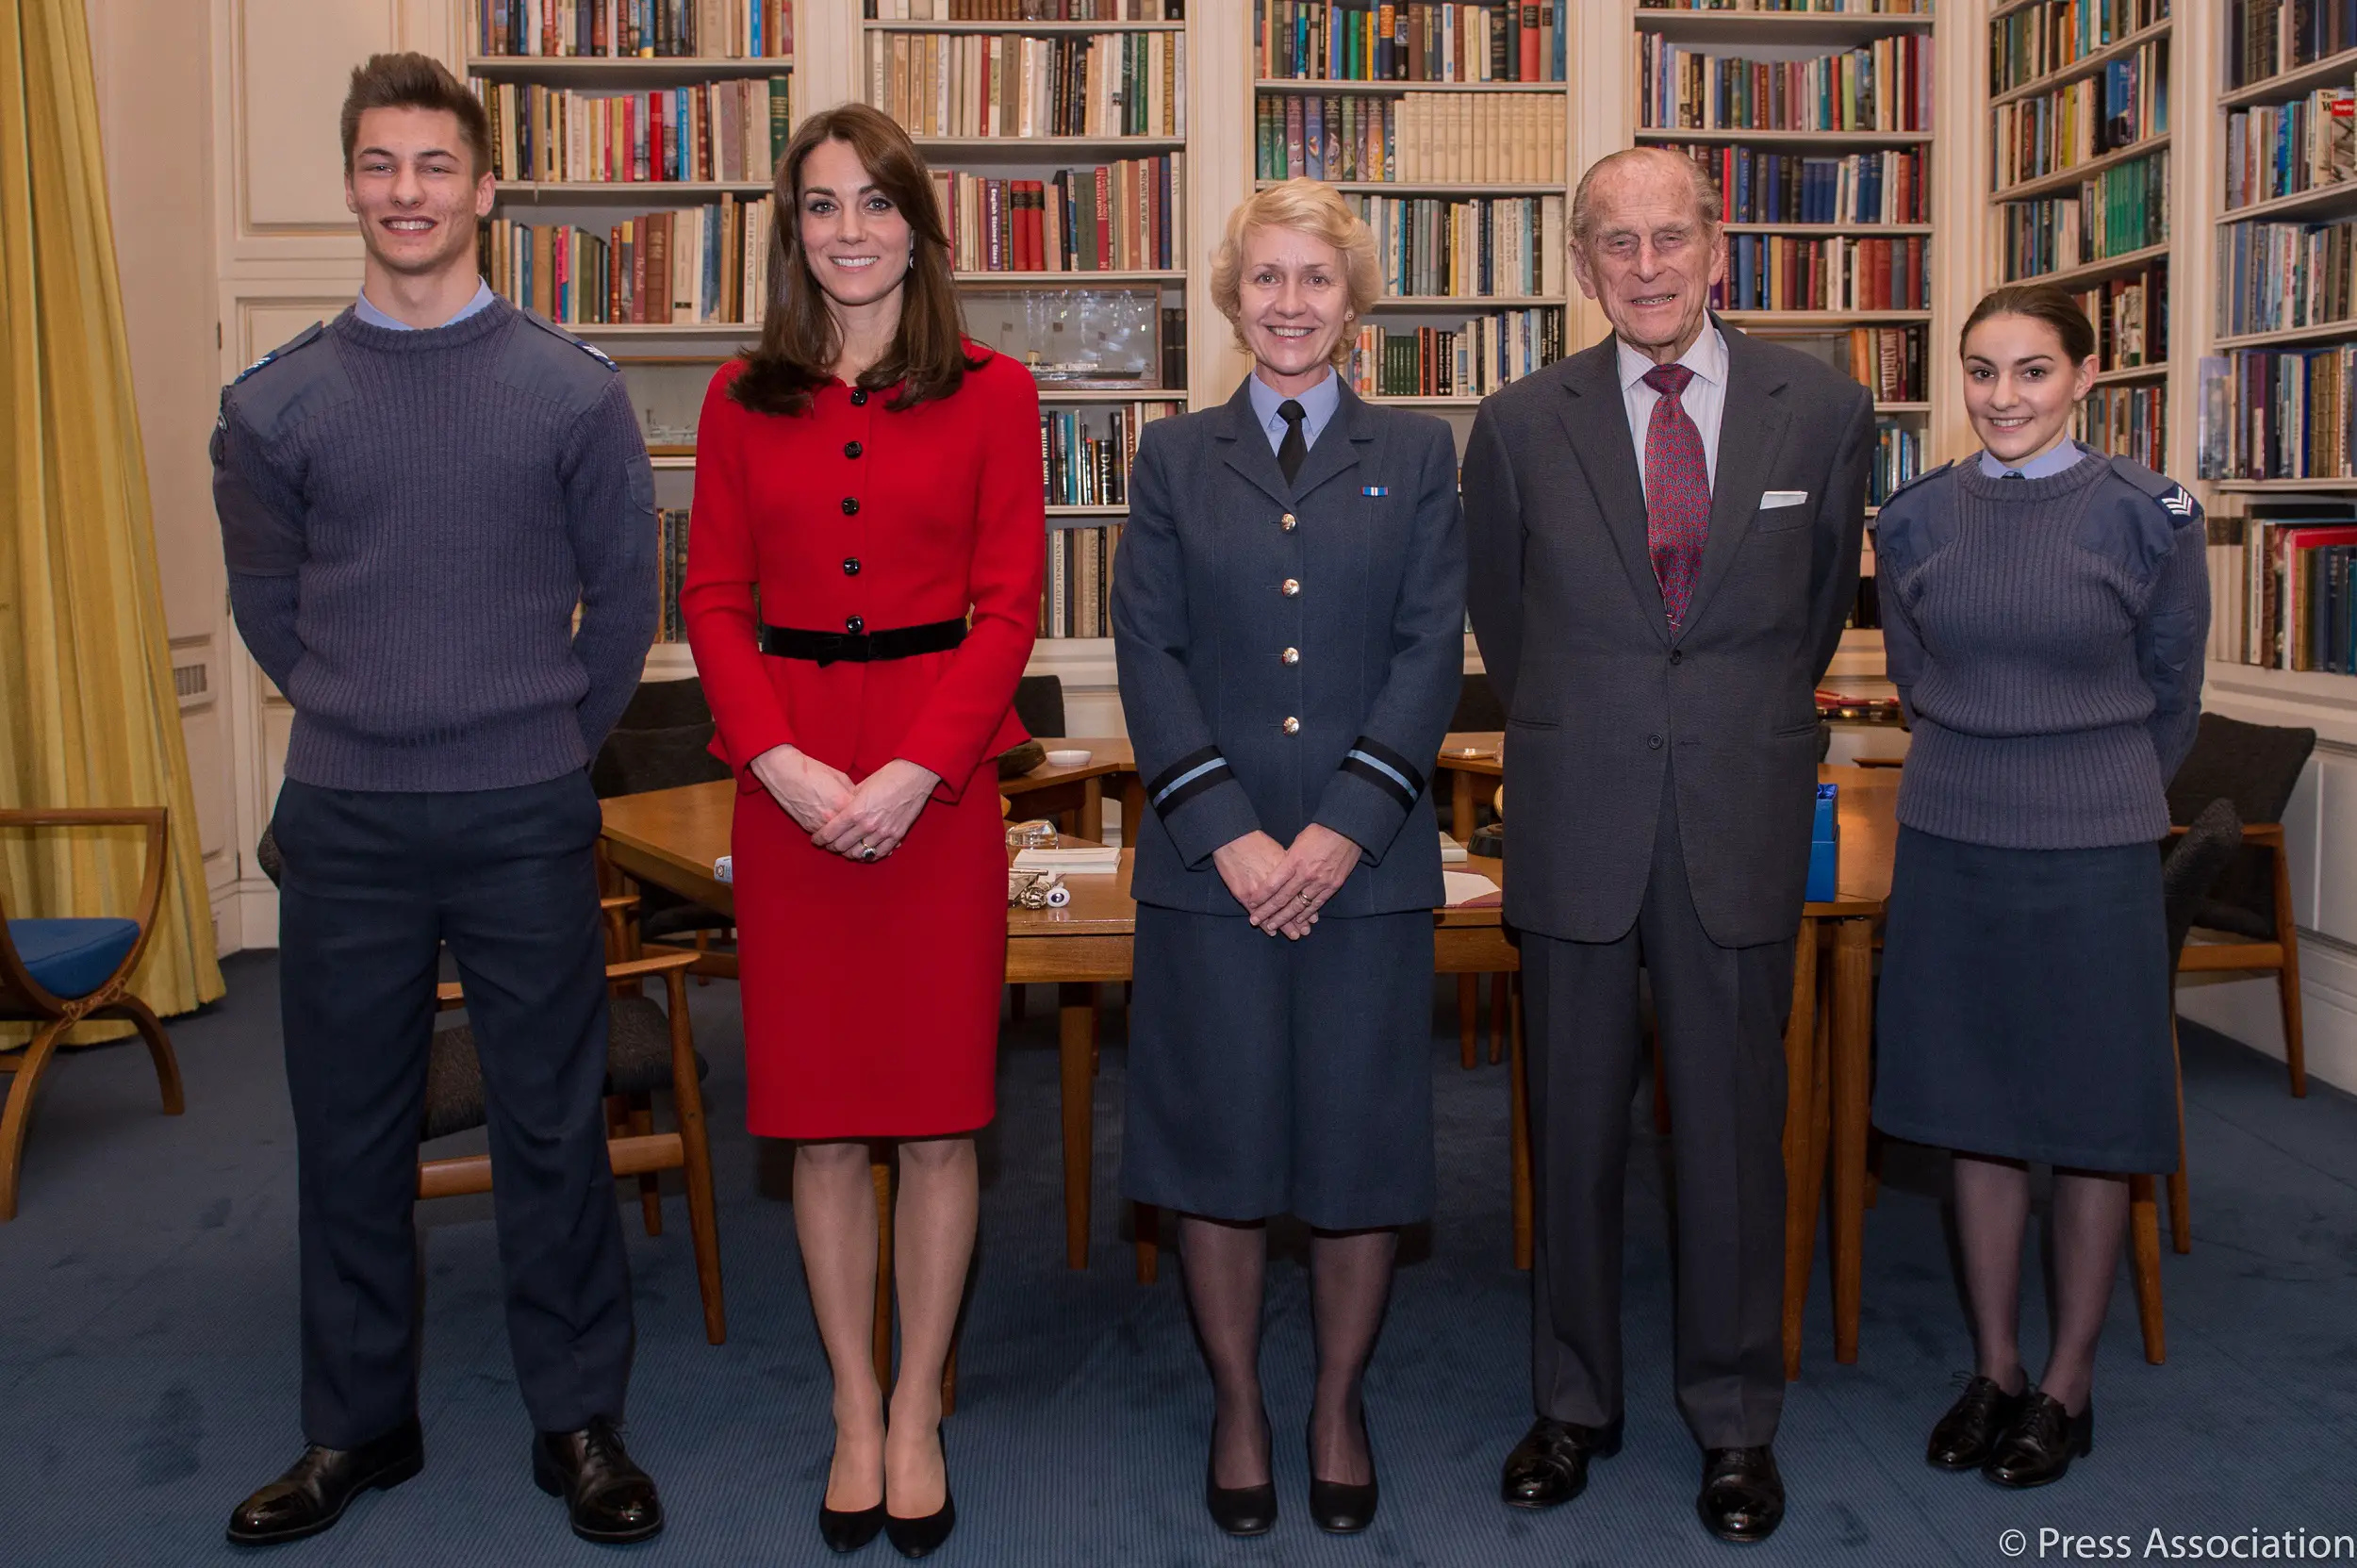 The Duchess of Cambridge took the RAF Air Cadets patronage from Prince Philip in December 2015